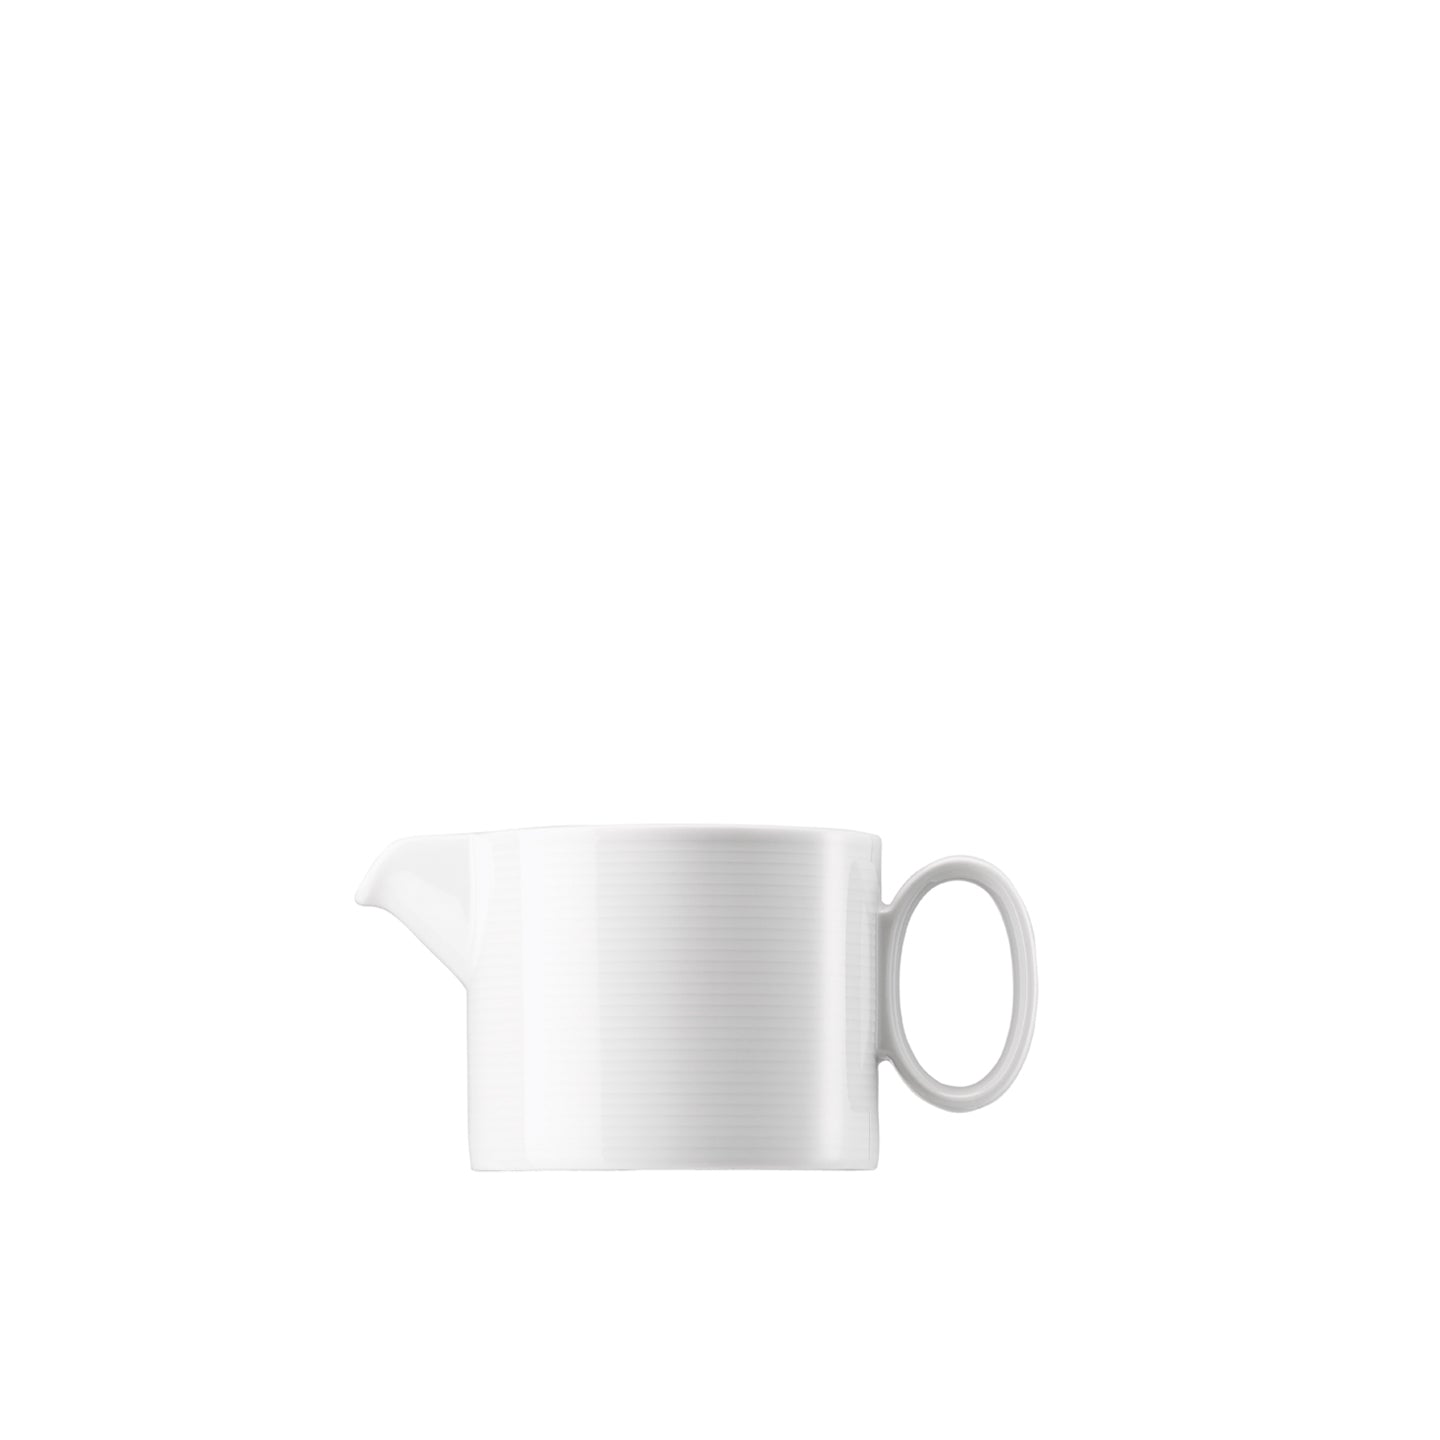 Loft by Rosenthal Small Sauce Boat  300ml